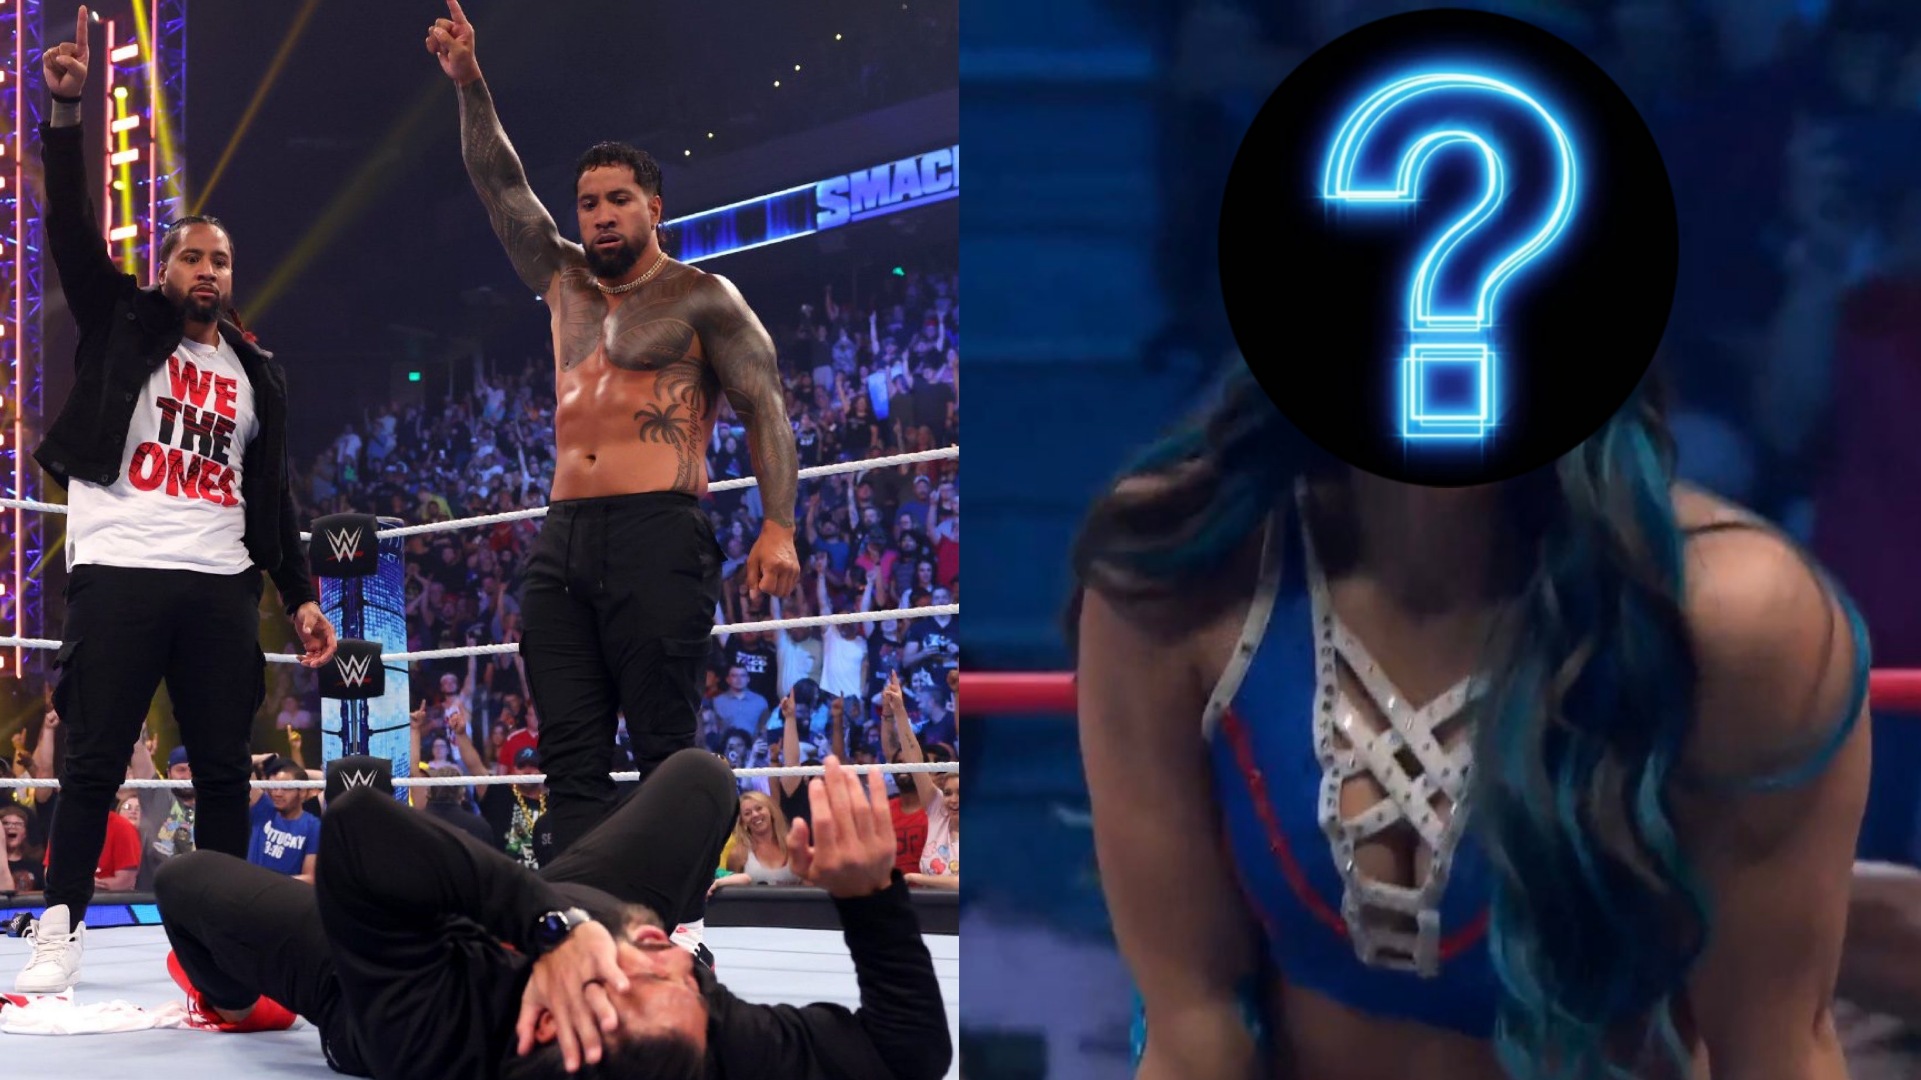 Female WWE stars take on The Usos Side after they attack Roman Reigns on SmackDown